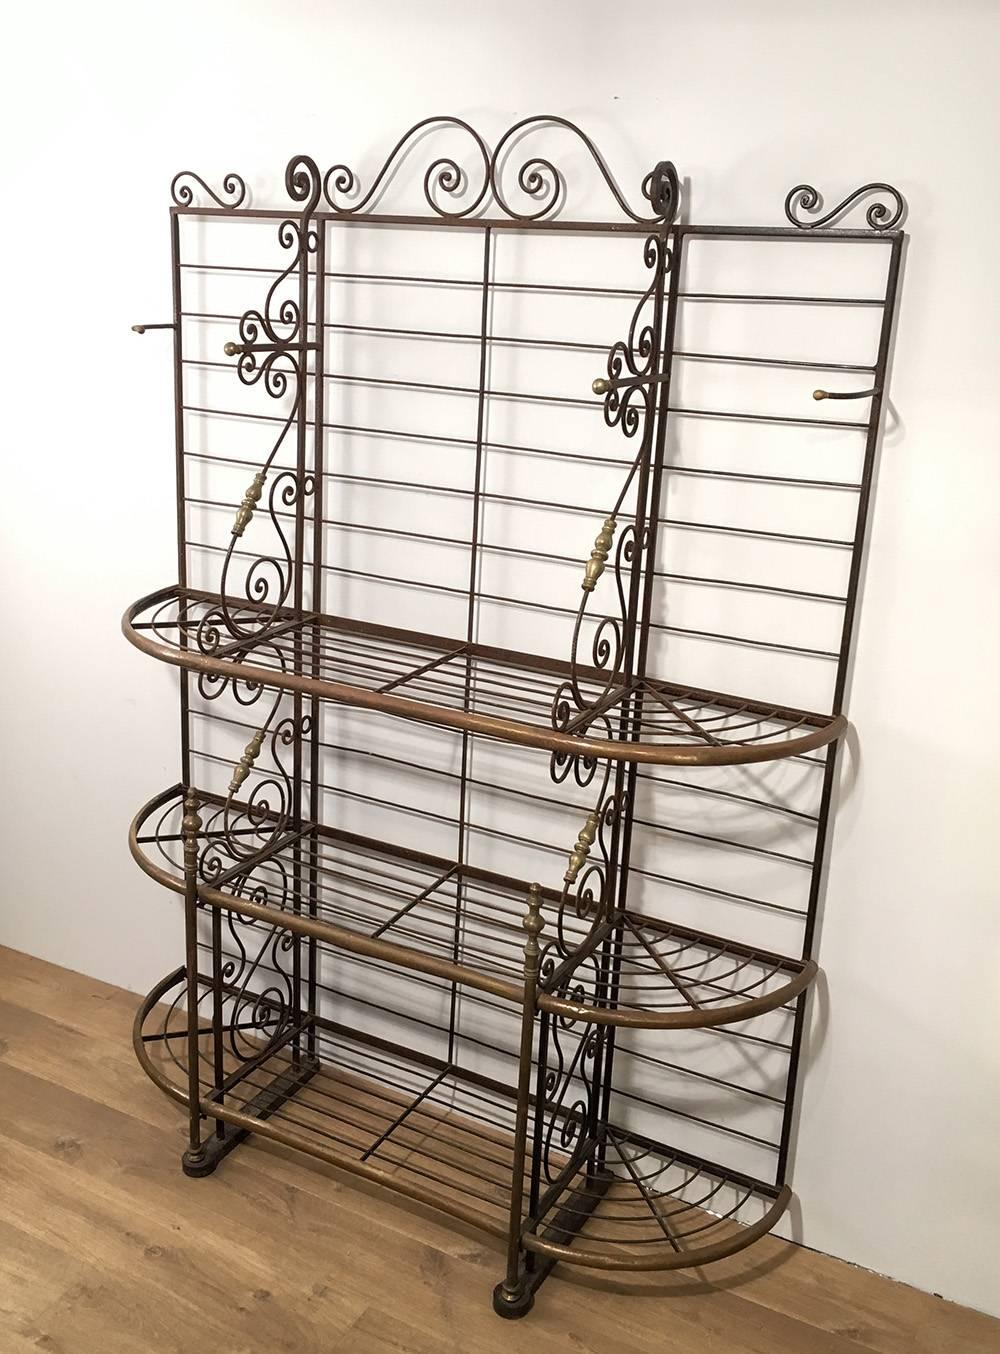 Authentic wrought iron and brass baker's rack with three shelves and hooks for hanging pots or tools. Very well made, French, circa 1950.

This piece is currently in France, please allow 4 to 6 weeks for delivery. Shipping to our warehouse in Long